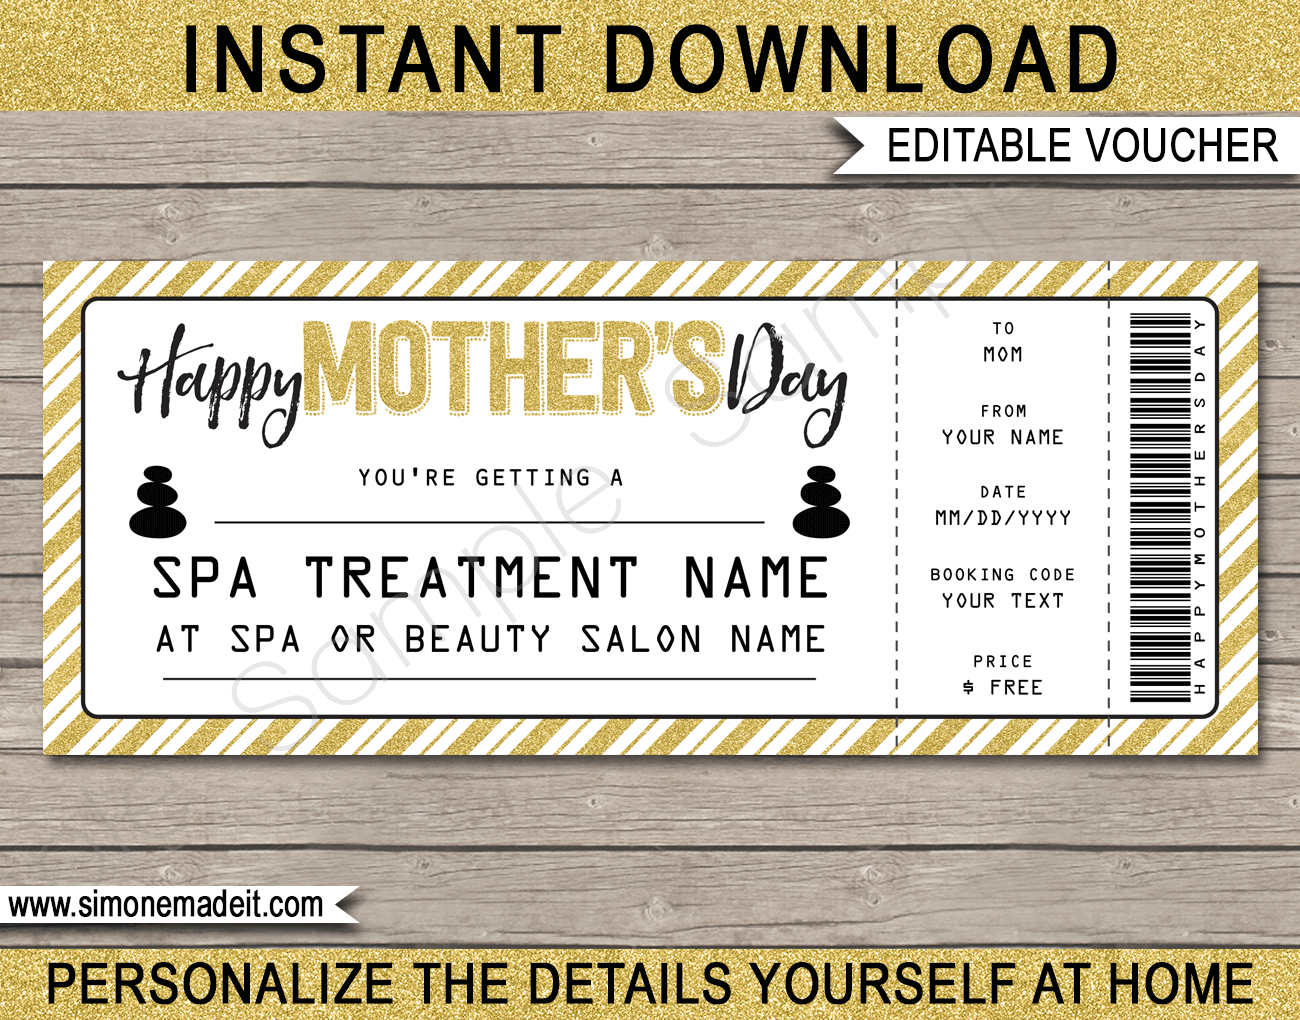 printable-mother-s-day-spa-voucher-template-spa-gift-certificate-for-mom